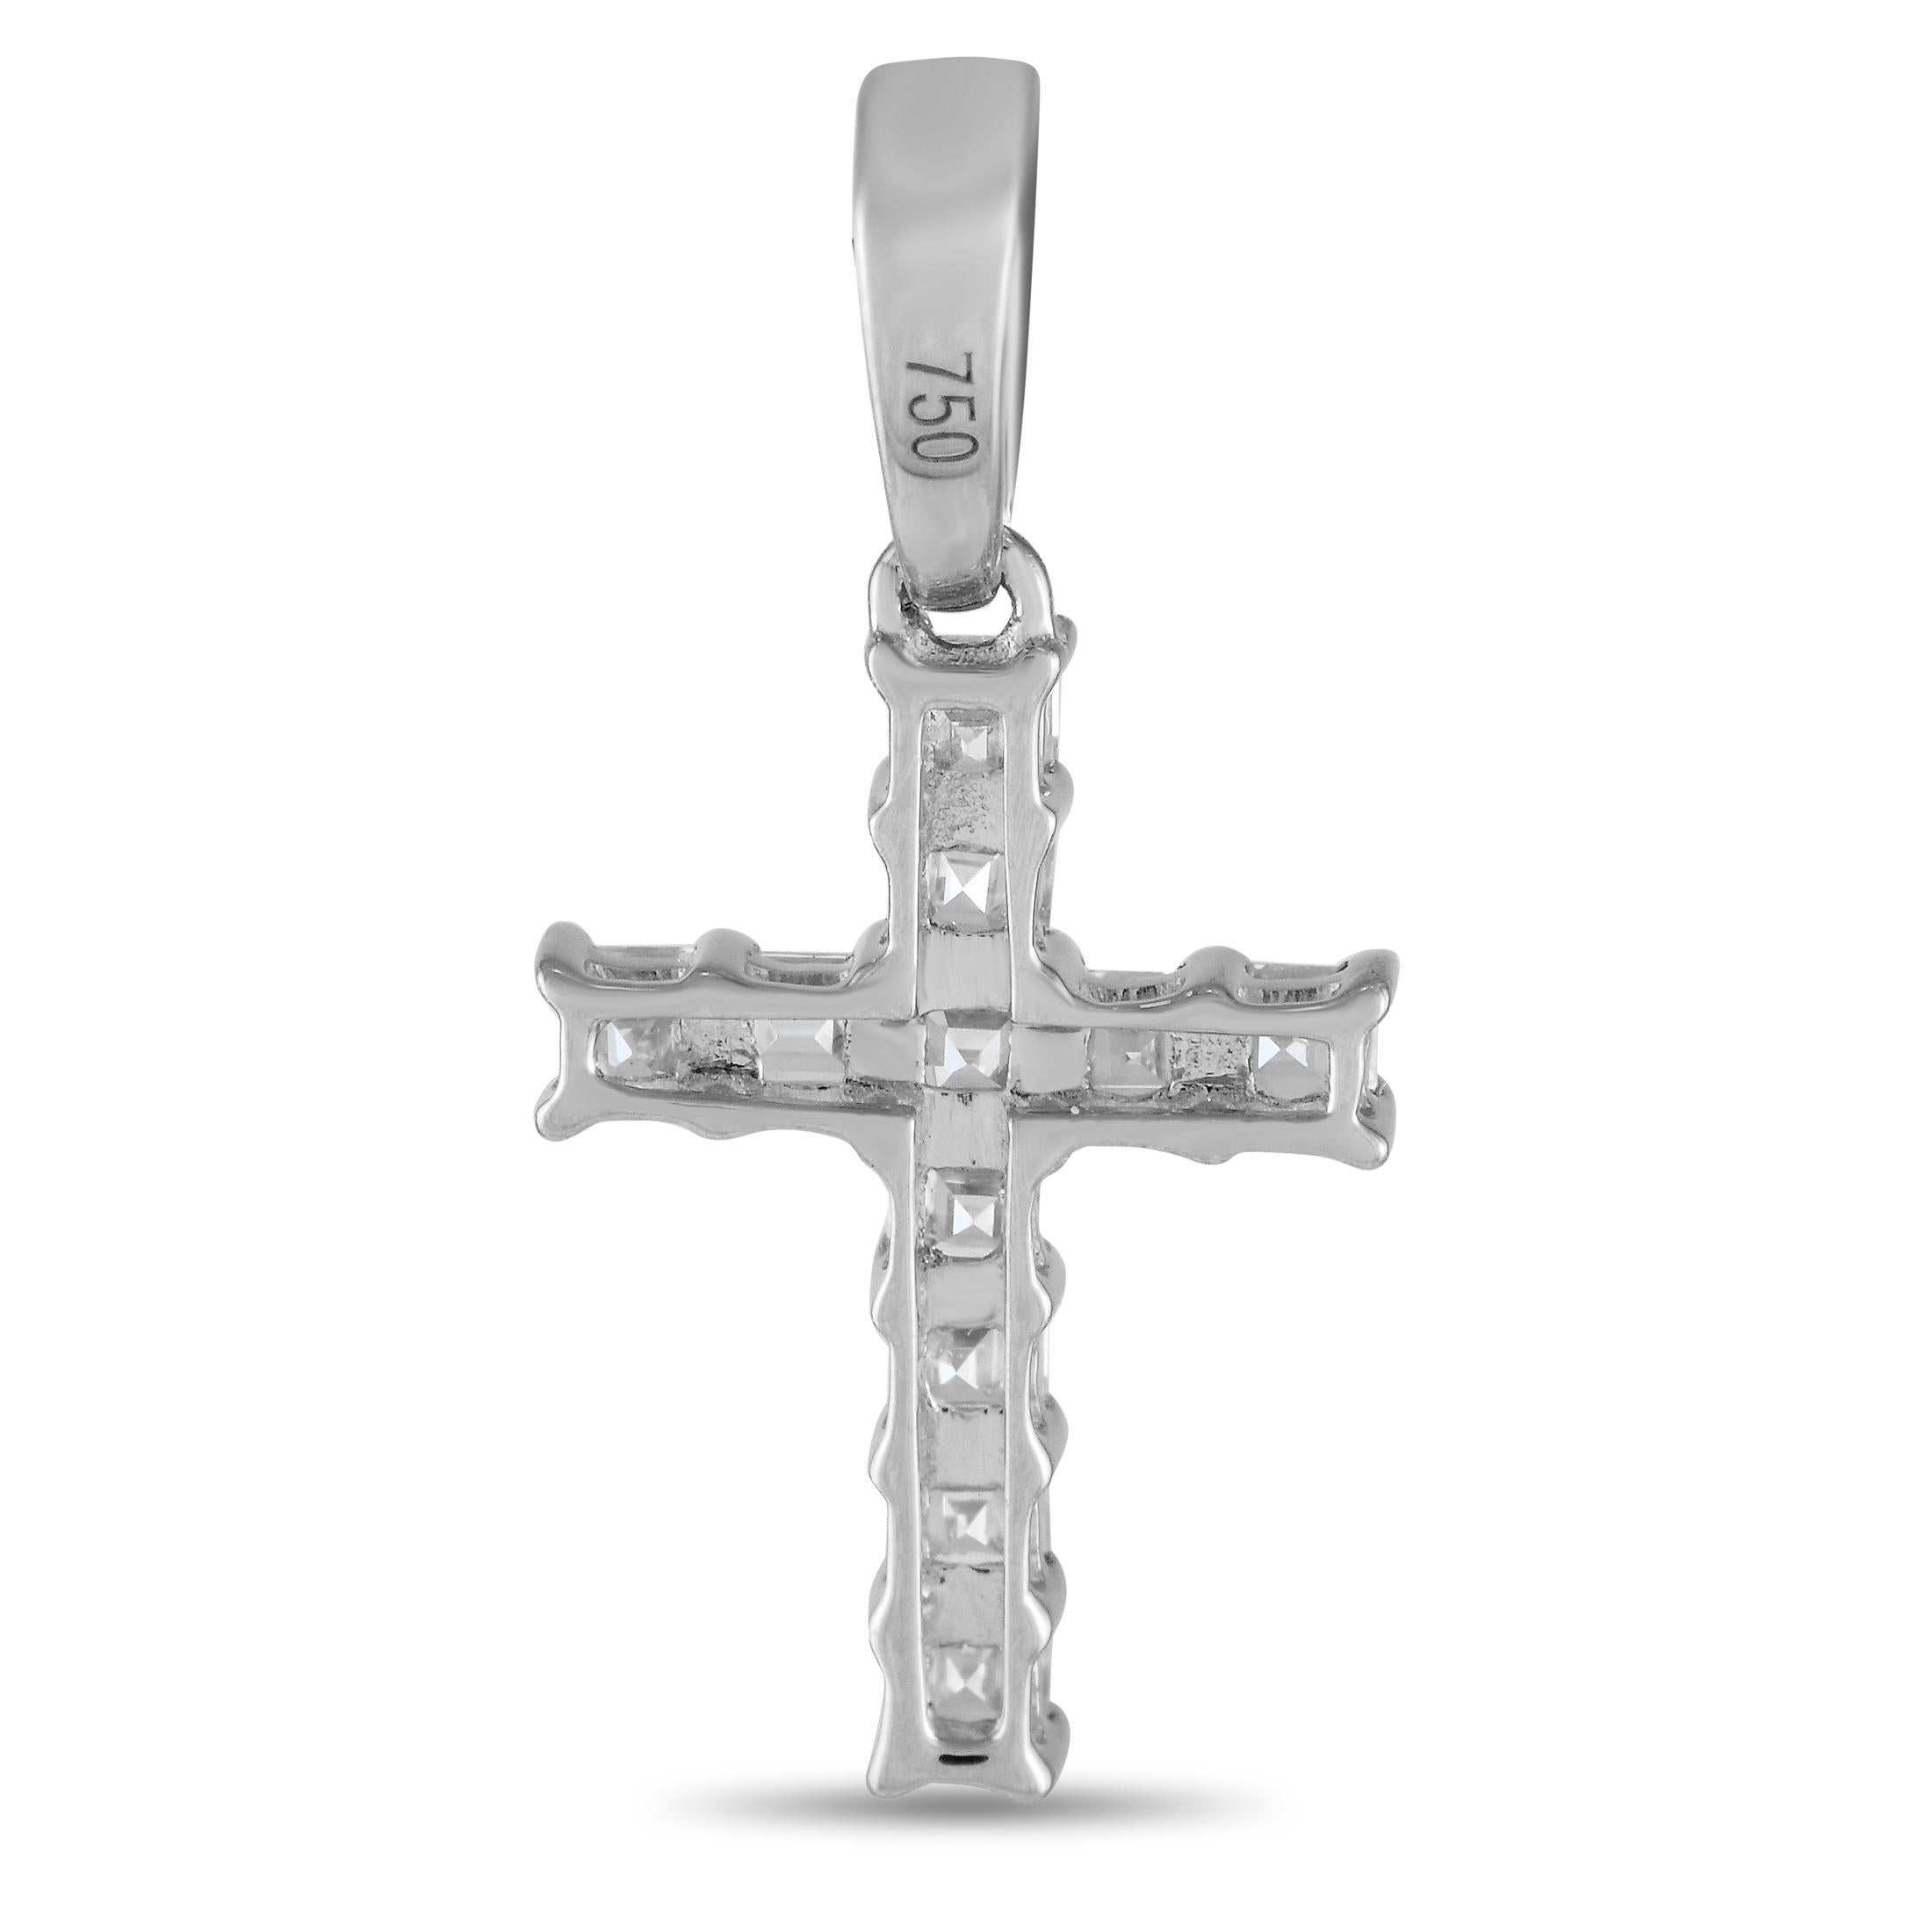 This cross shaped pendant is incredibly elegant. Crafted from 18K White Gold, it measures 0.75 long by 0.45 wide and is covered in Diamonds totaling 0.37 carats.This jewelry piece is offered in brand new condition and includes a gift box.